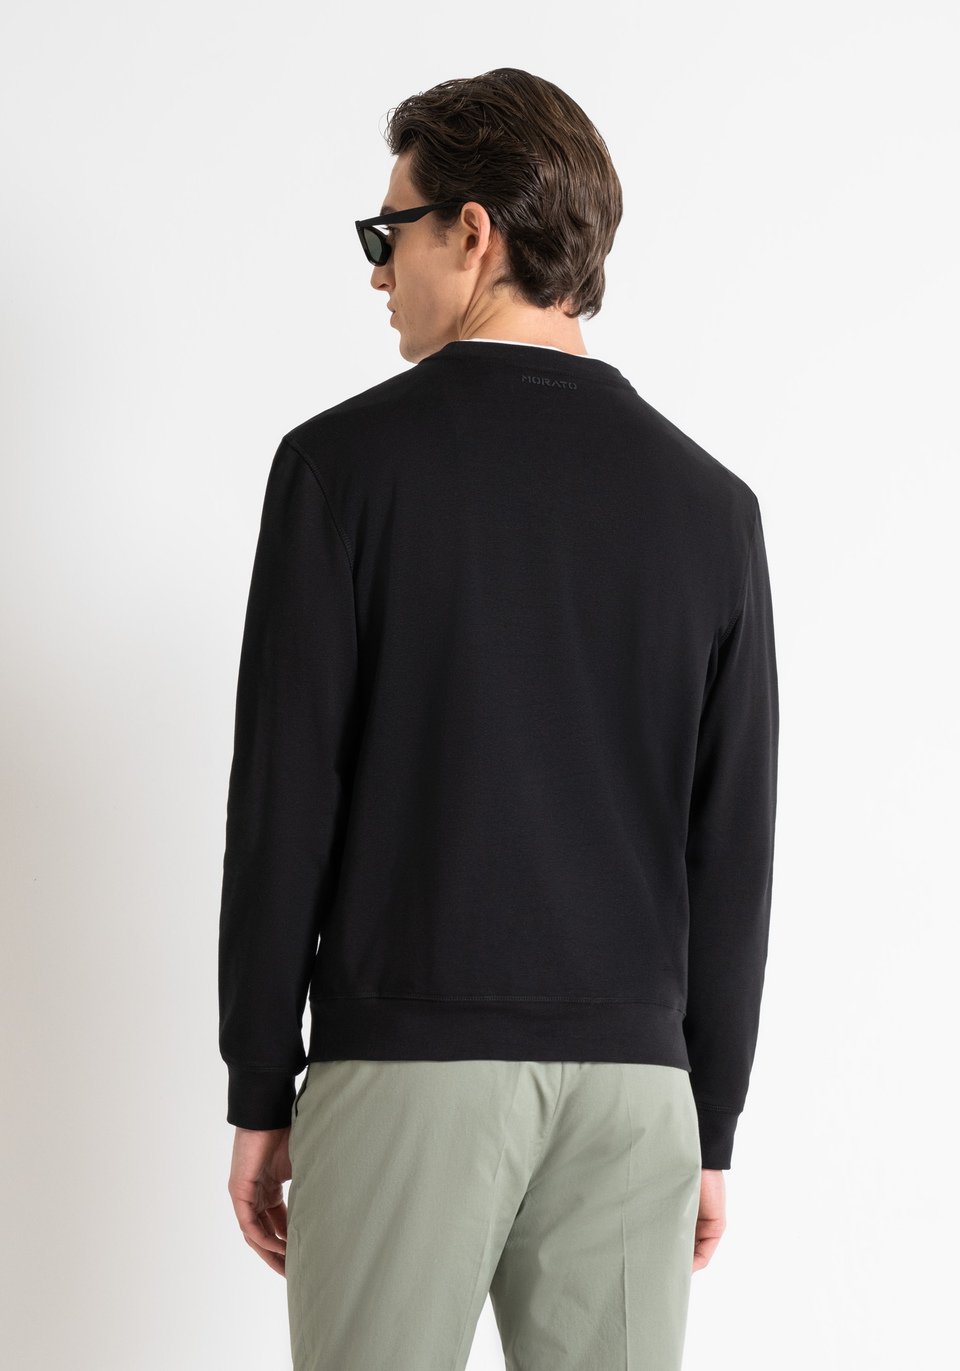 REGULAR FIT SWEATSHIRT IN COTTON BLEND WITH SUSTAINABLE POLYESTER WITH FLOCK PRINT - Antony Morato Online Shop